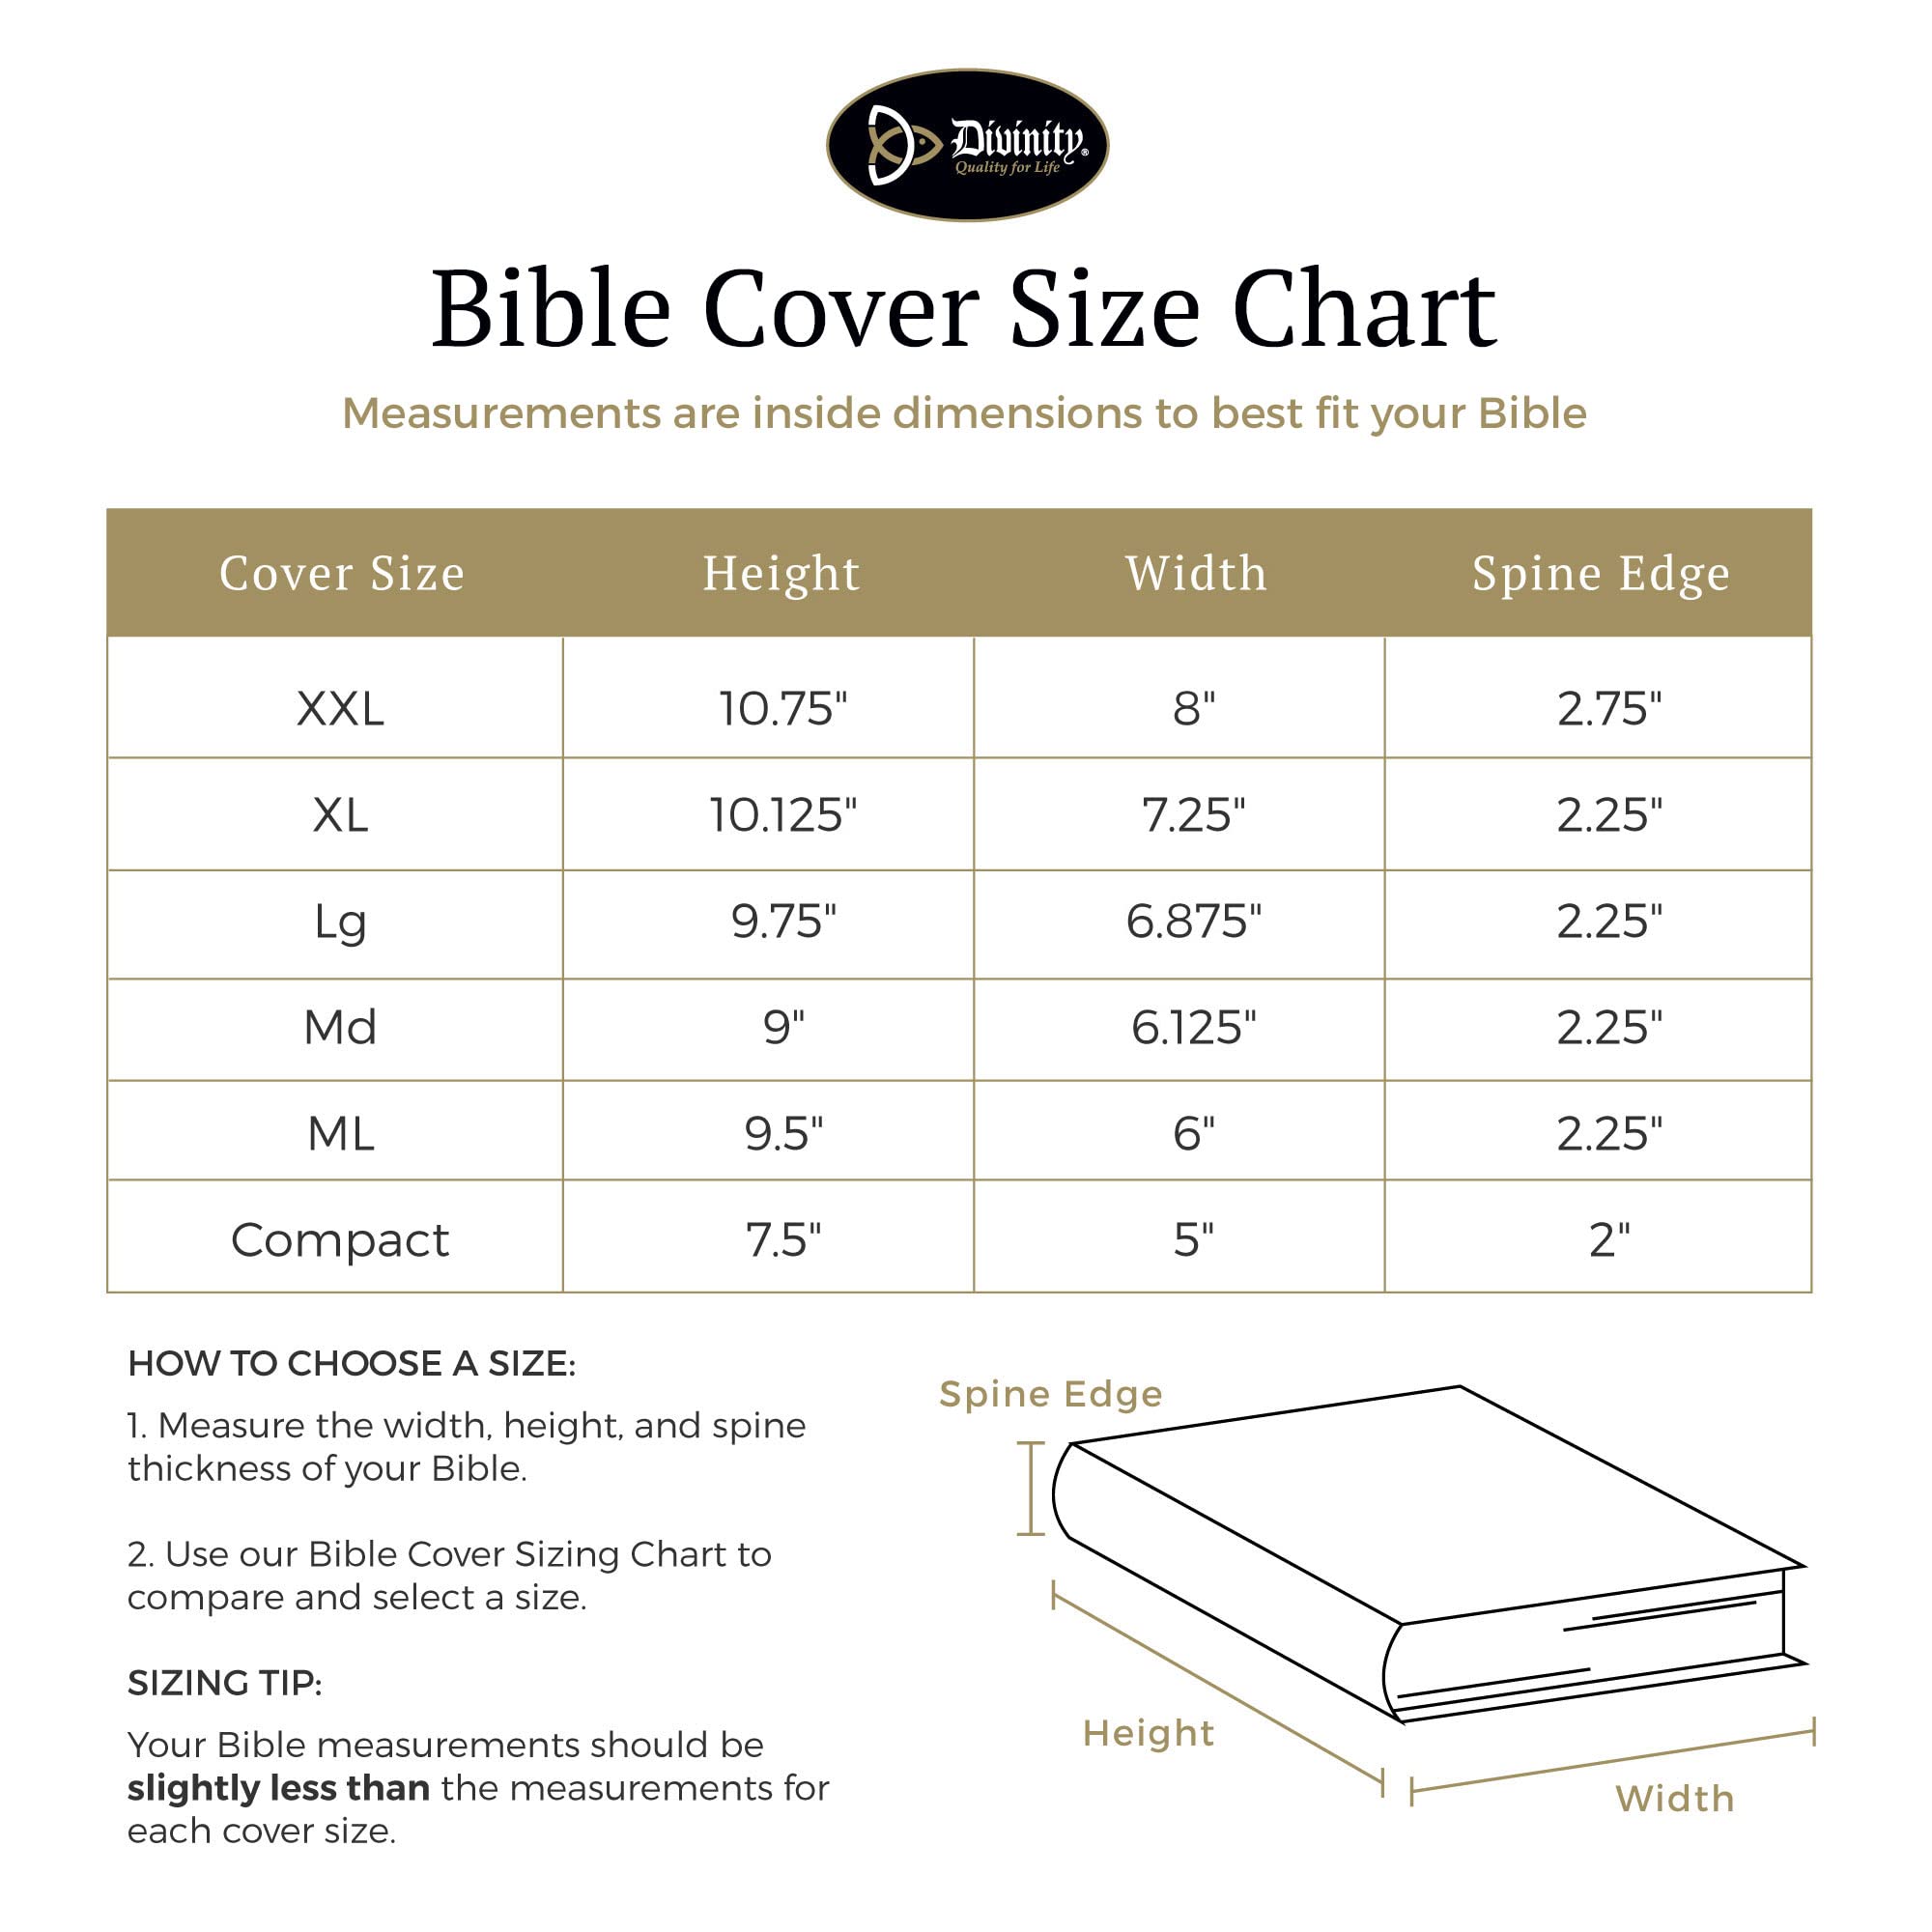 Divinity Boutique, Canvas Bible Case - Black Bible Cover for Men and Women - for Compact, Extra-Large and XX-Large Books